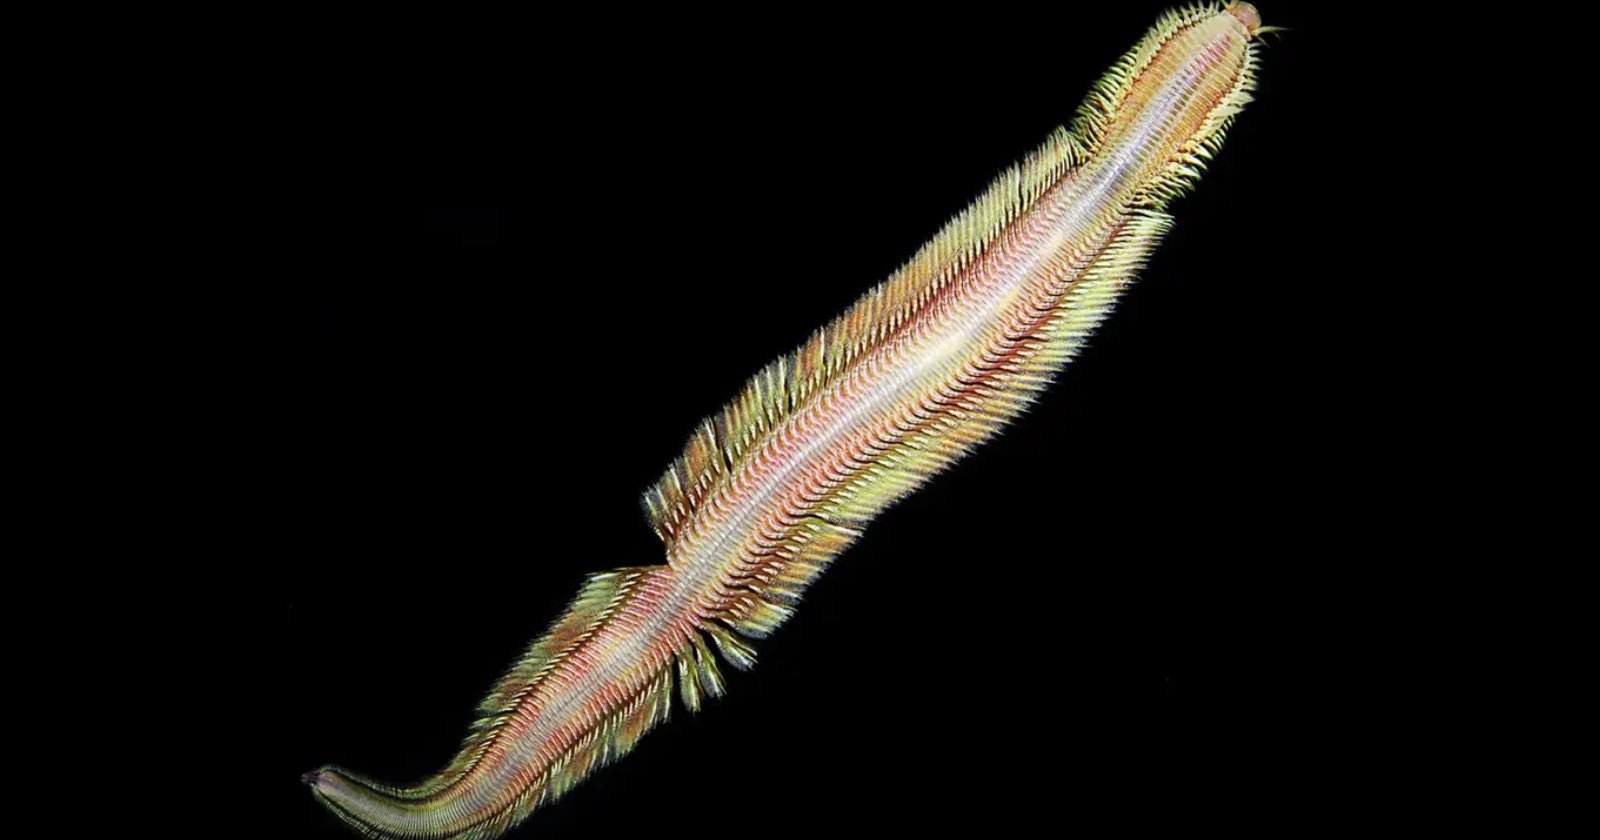 Scientists Photograph Never-Before-Seen Living Magic Carpet Worm in Ocean